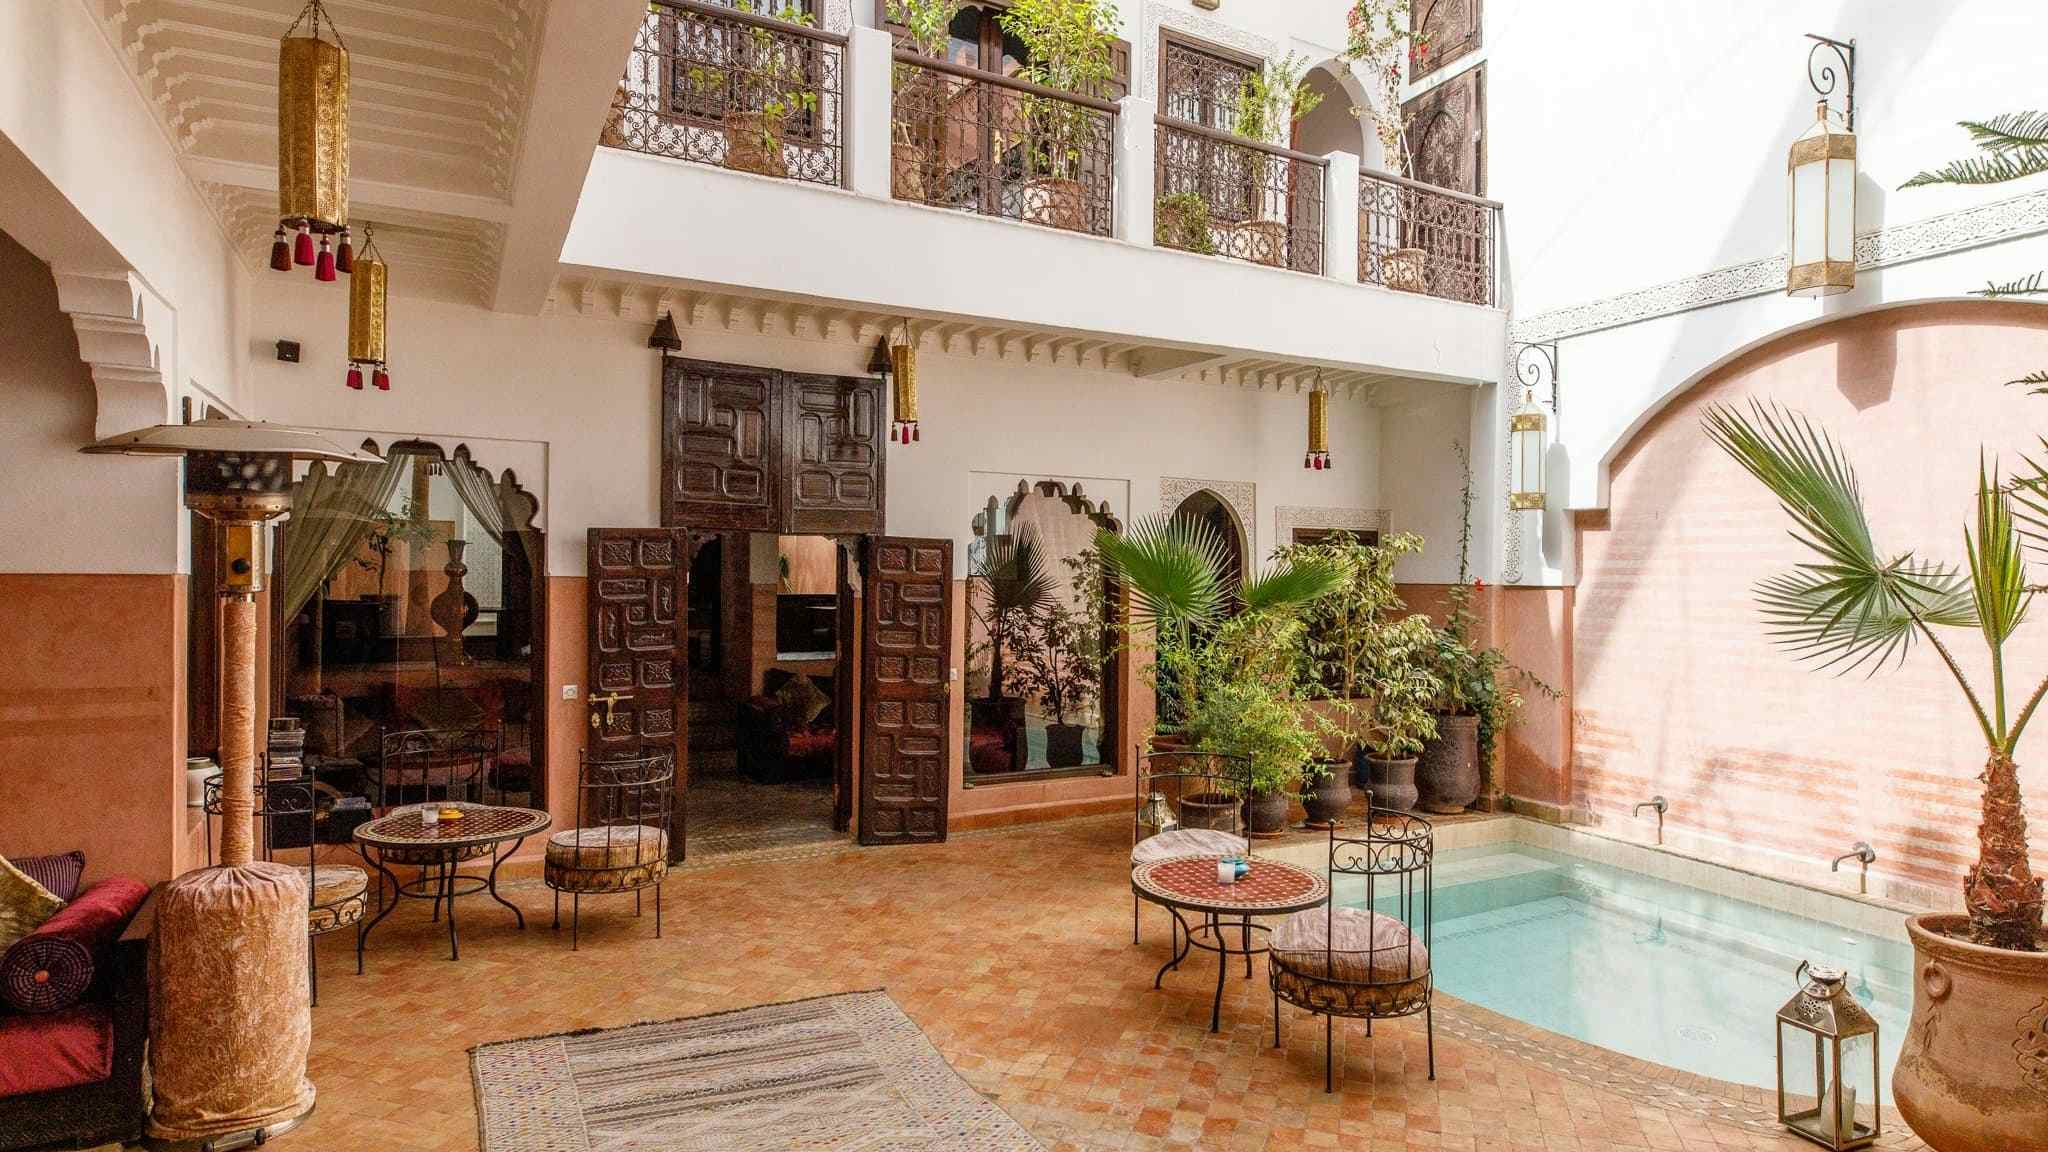 The inside of a beautiful riad in Marrakesh, Morocco. 